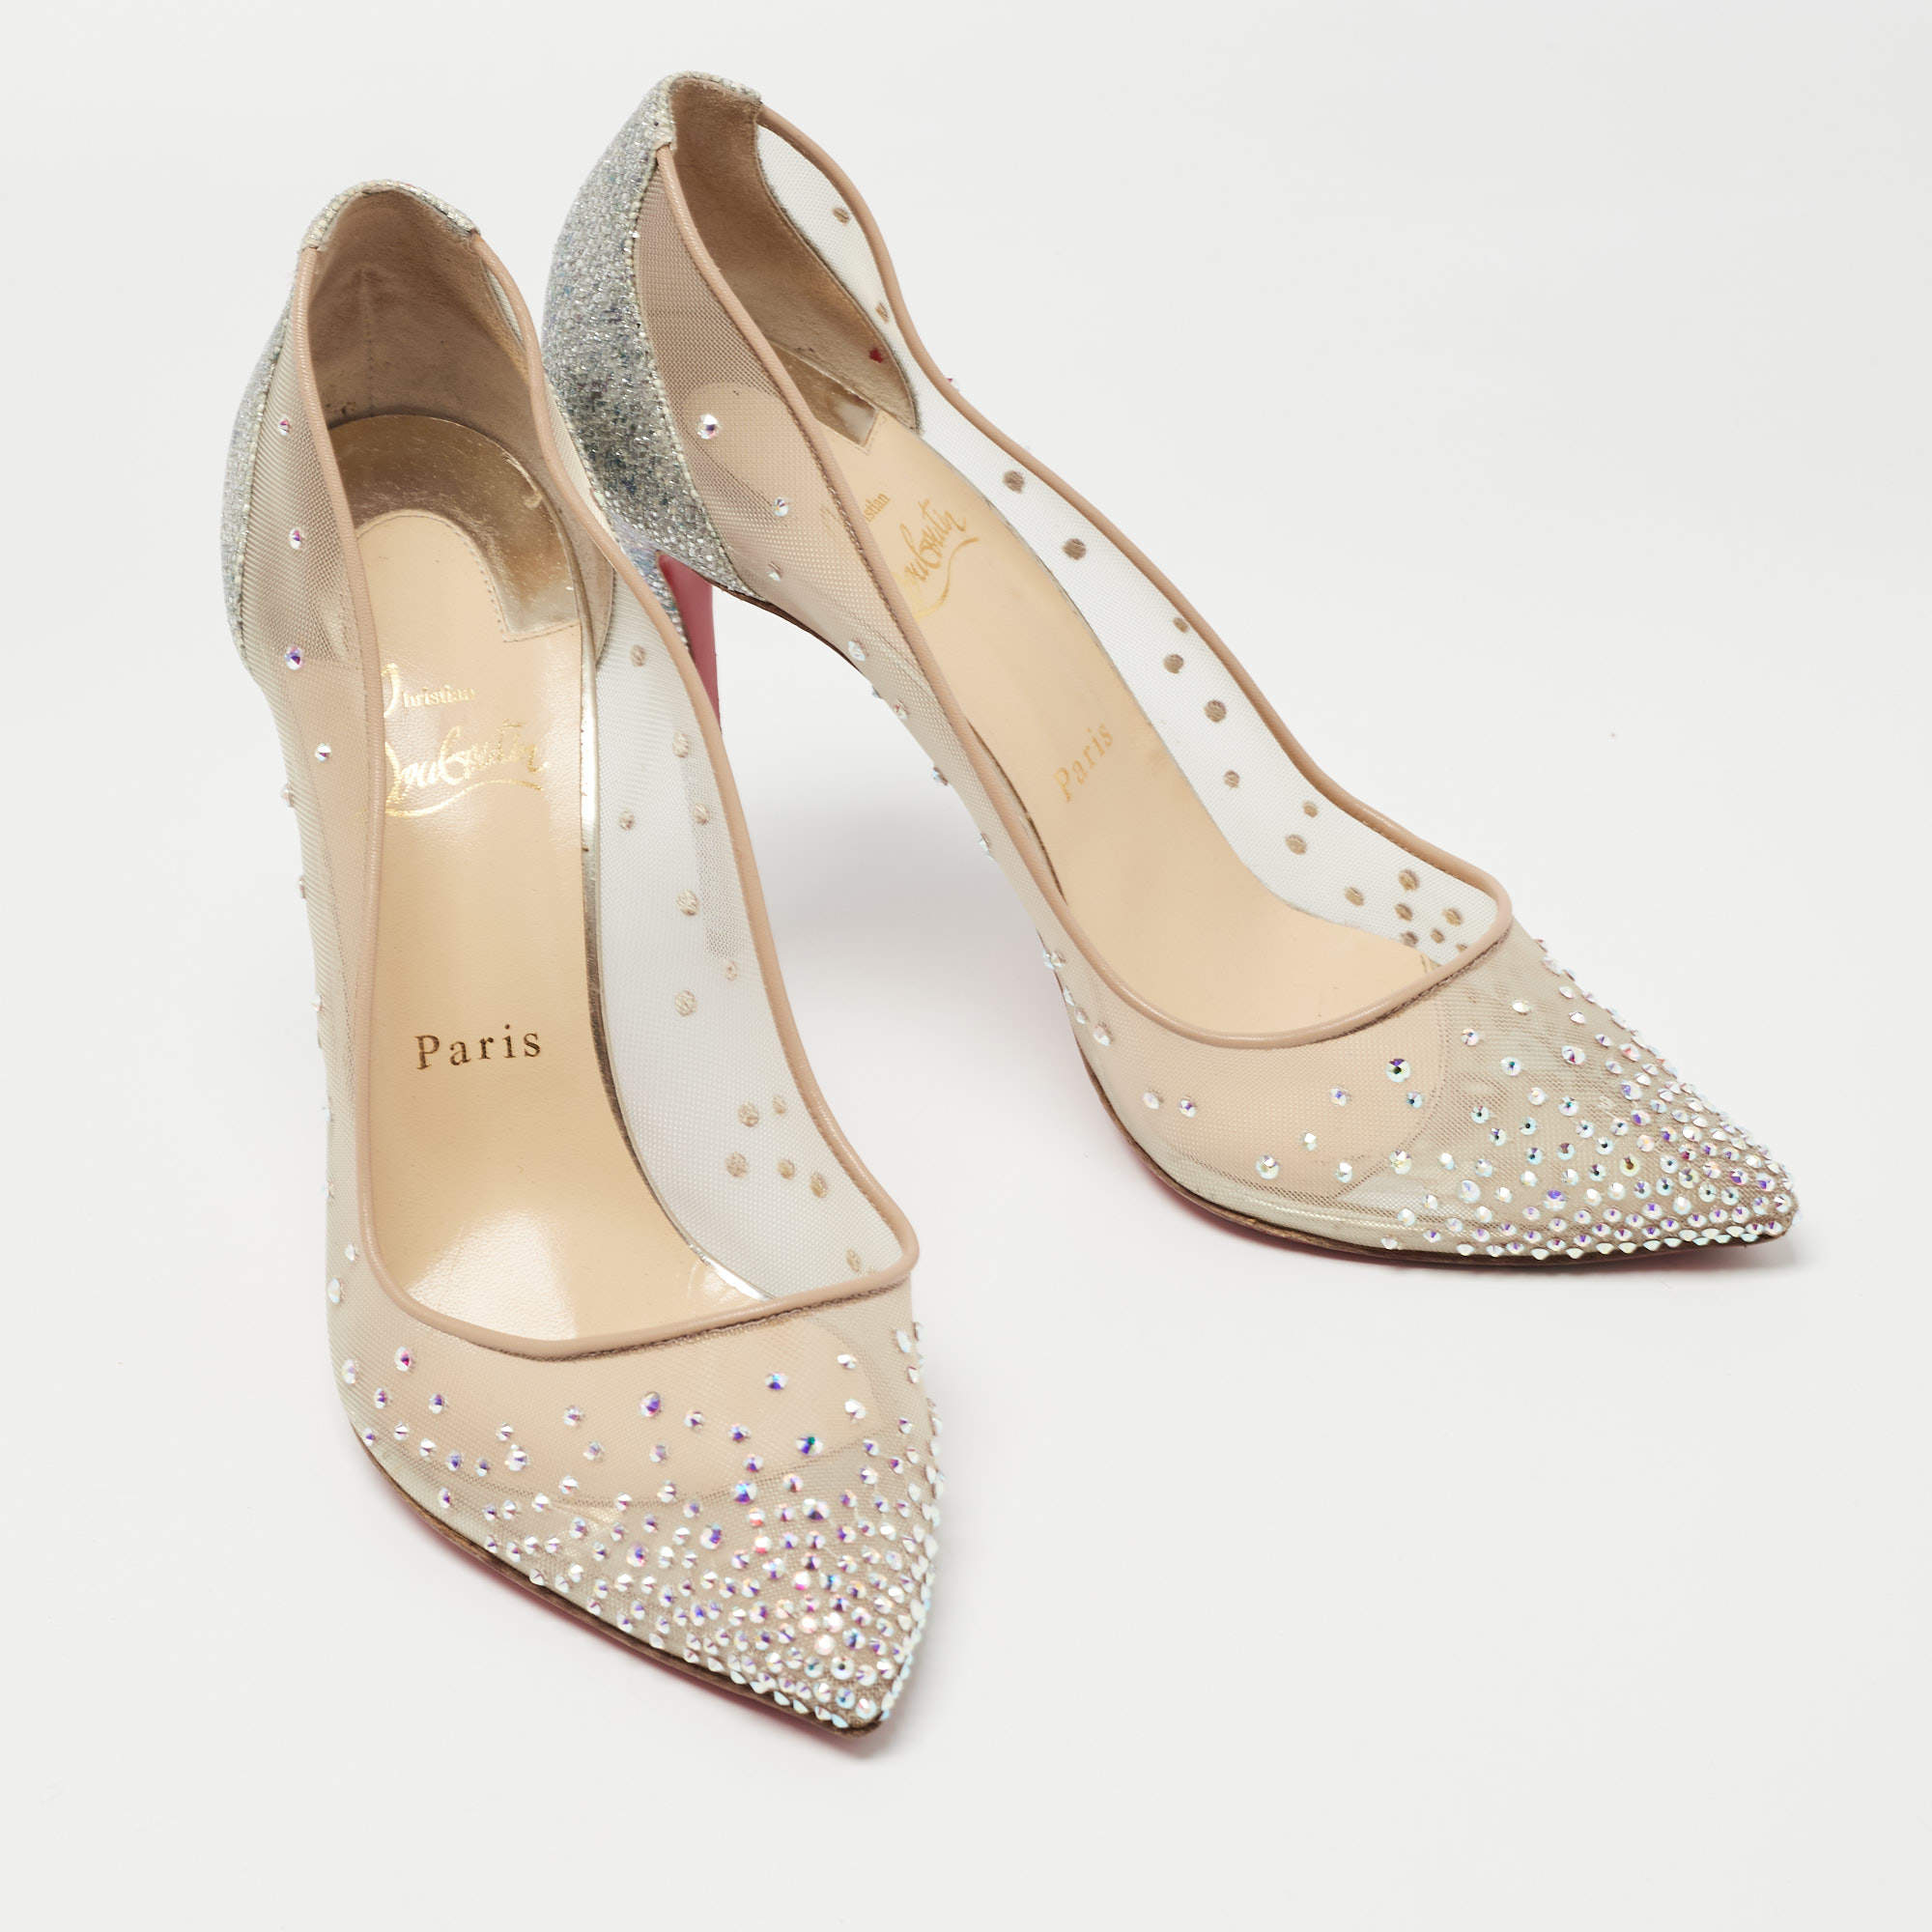 Beige/Silver Mesh and Leather Follies Strass Pumps Size 35.5 @ 19,900 73%  off the retail (72,609) 9.5/10 Preowned Condition Comes with box…